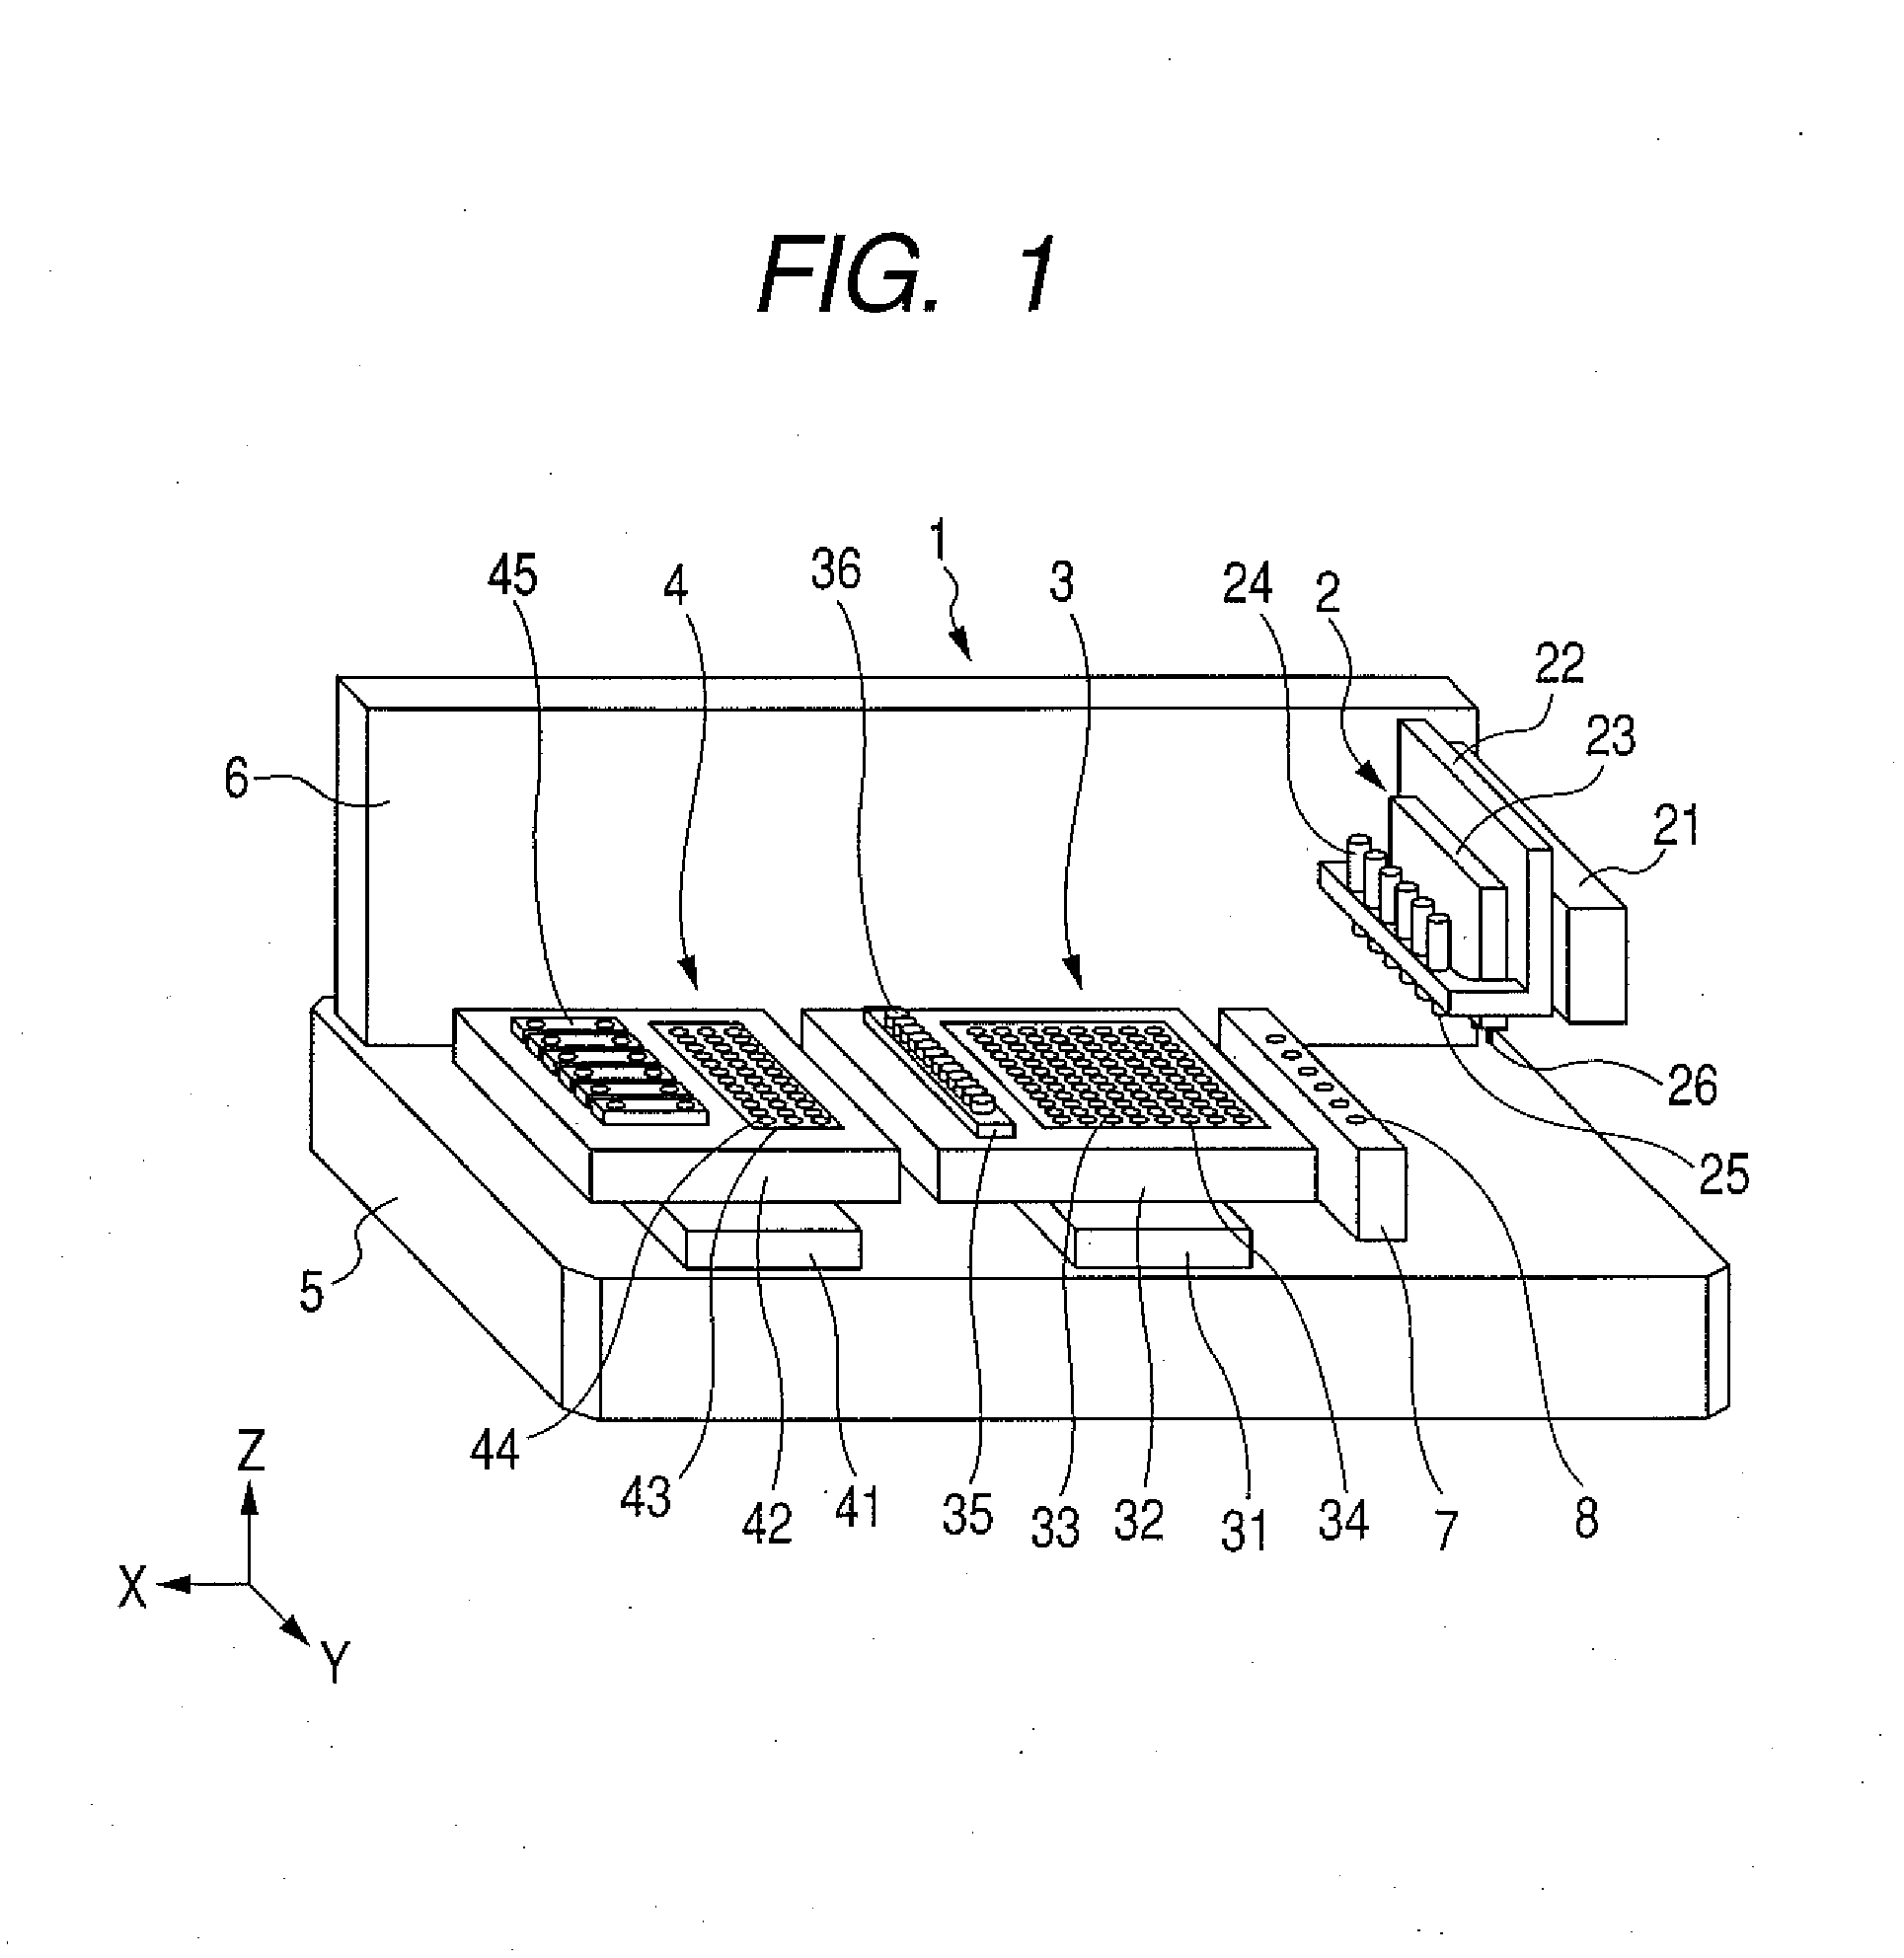 Nucleic acid automatic examining device